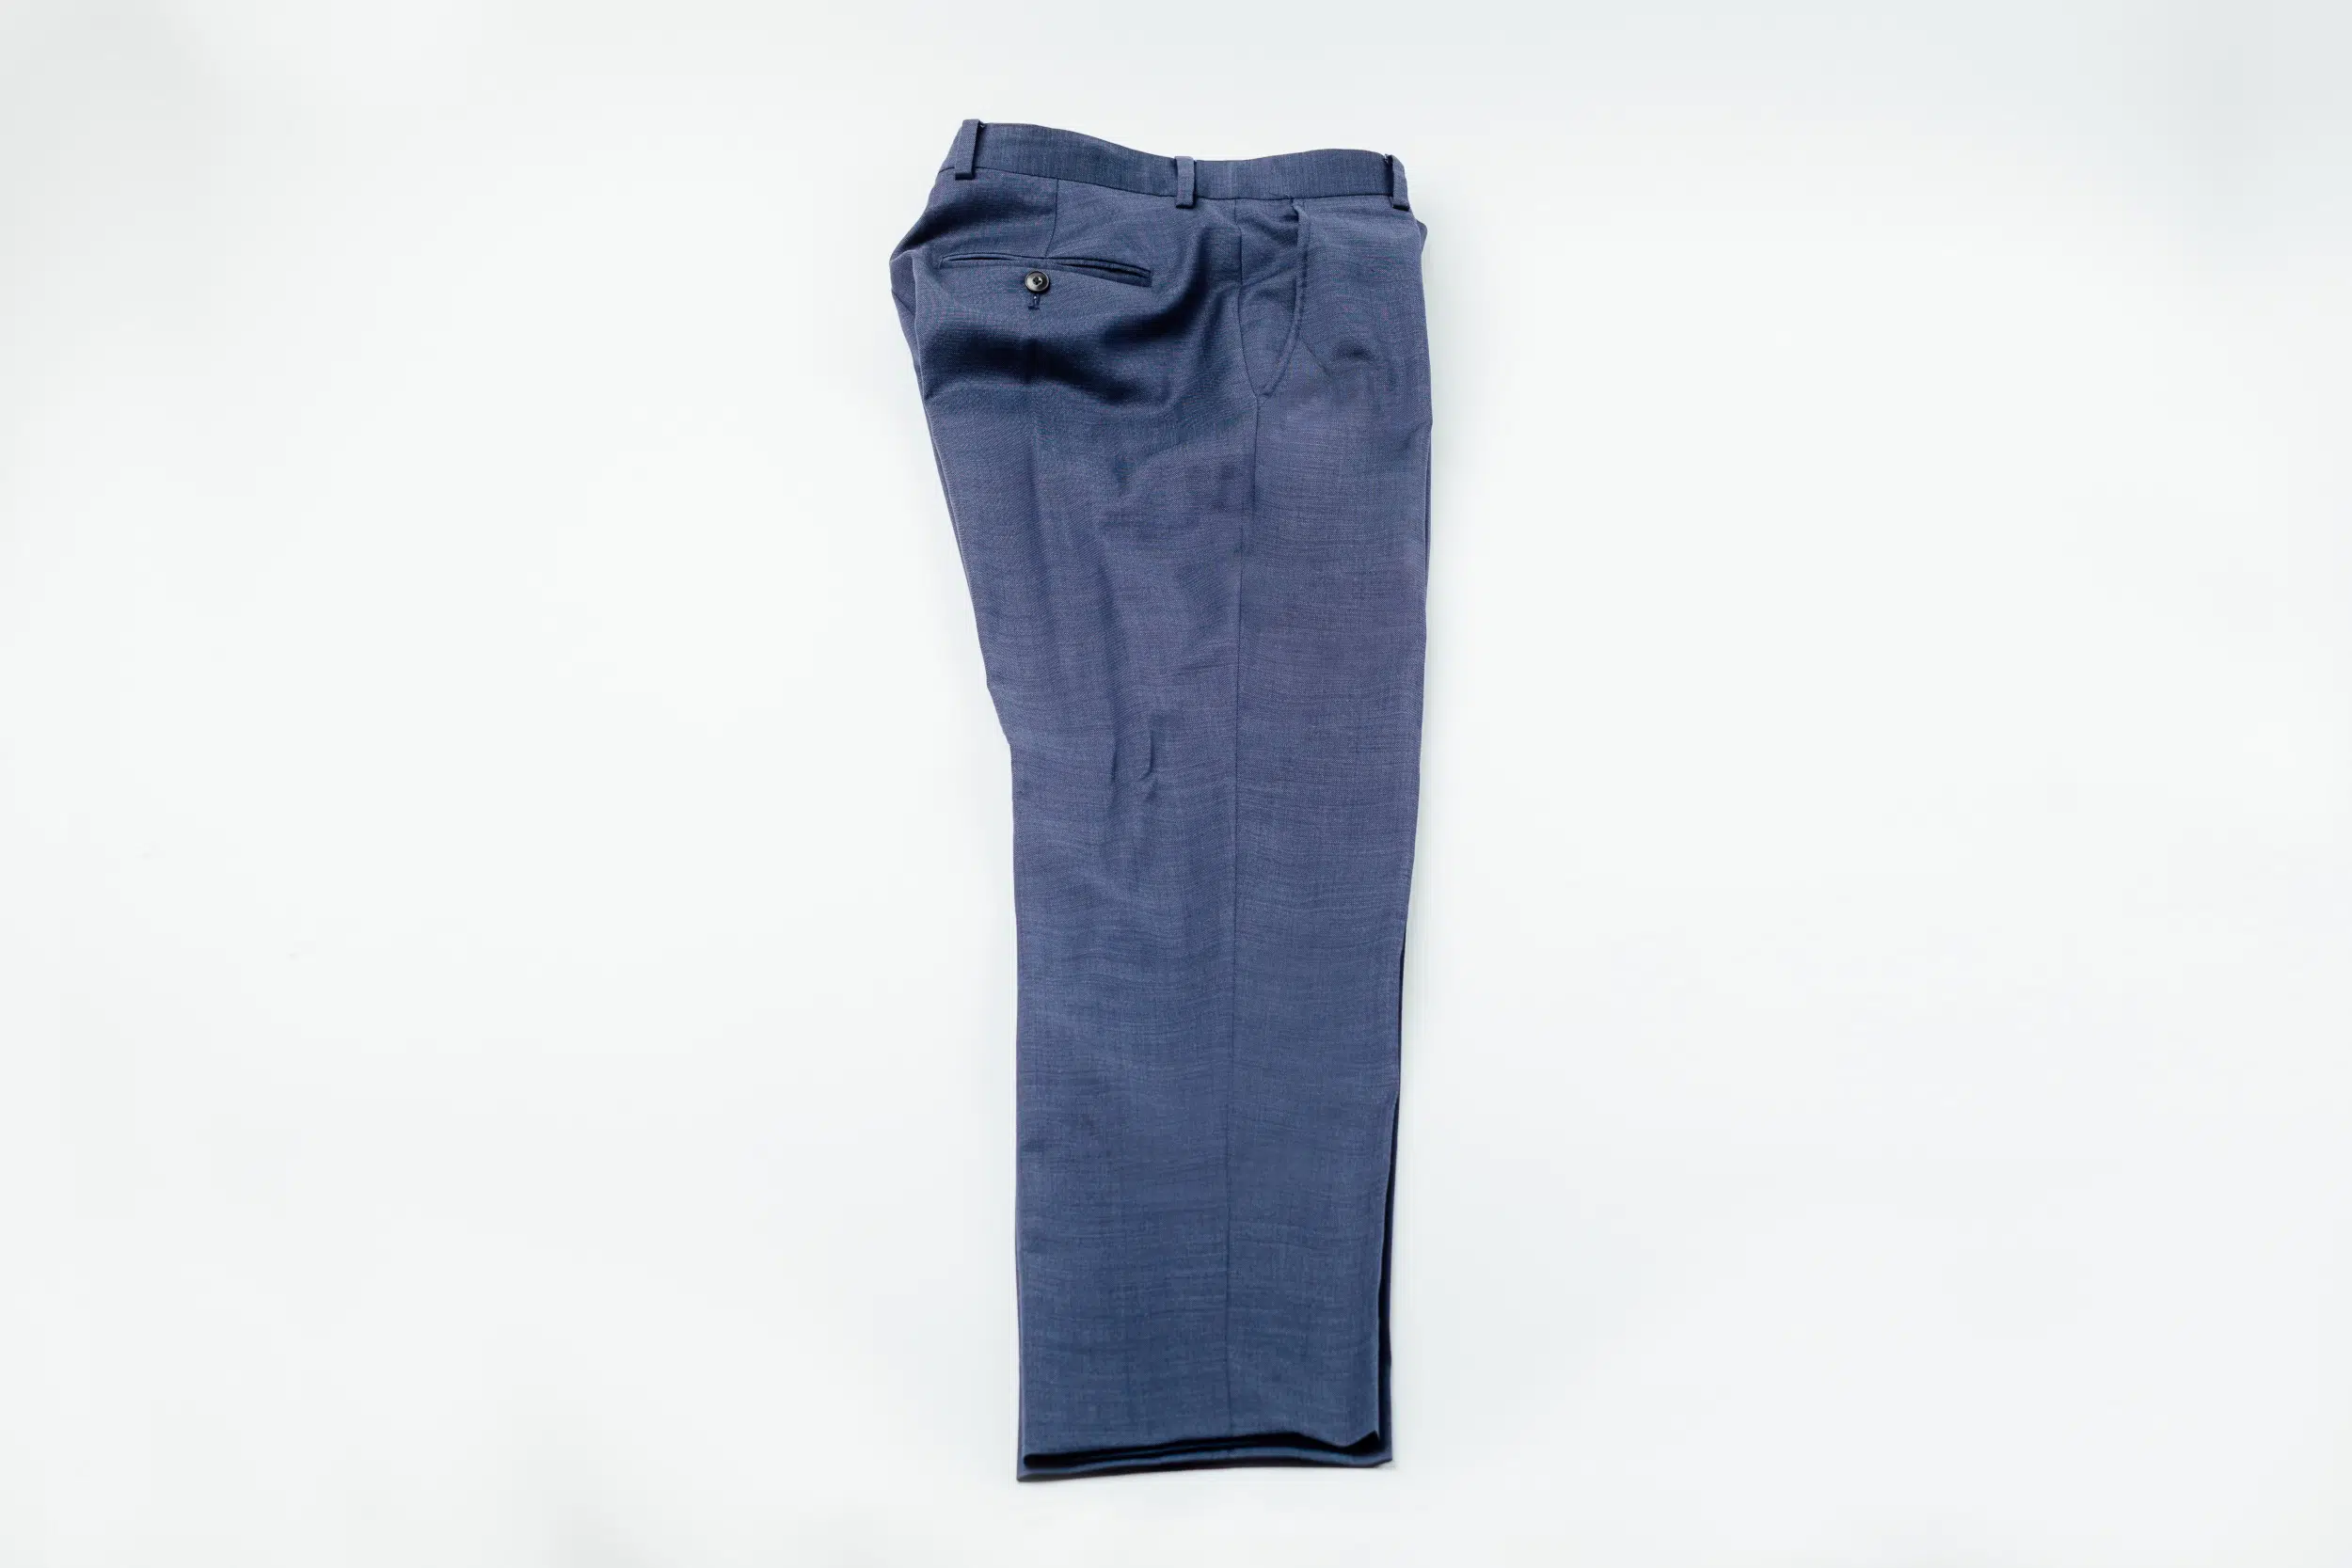 Jos Bank Suit Pants Creases Lined Up